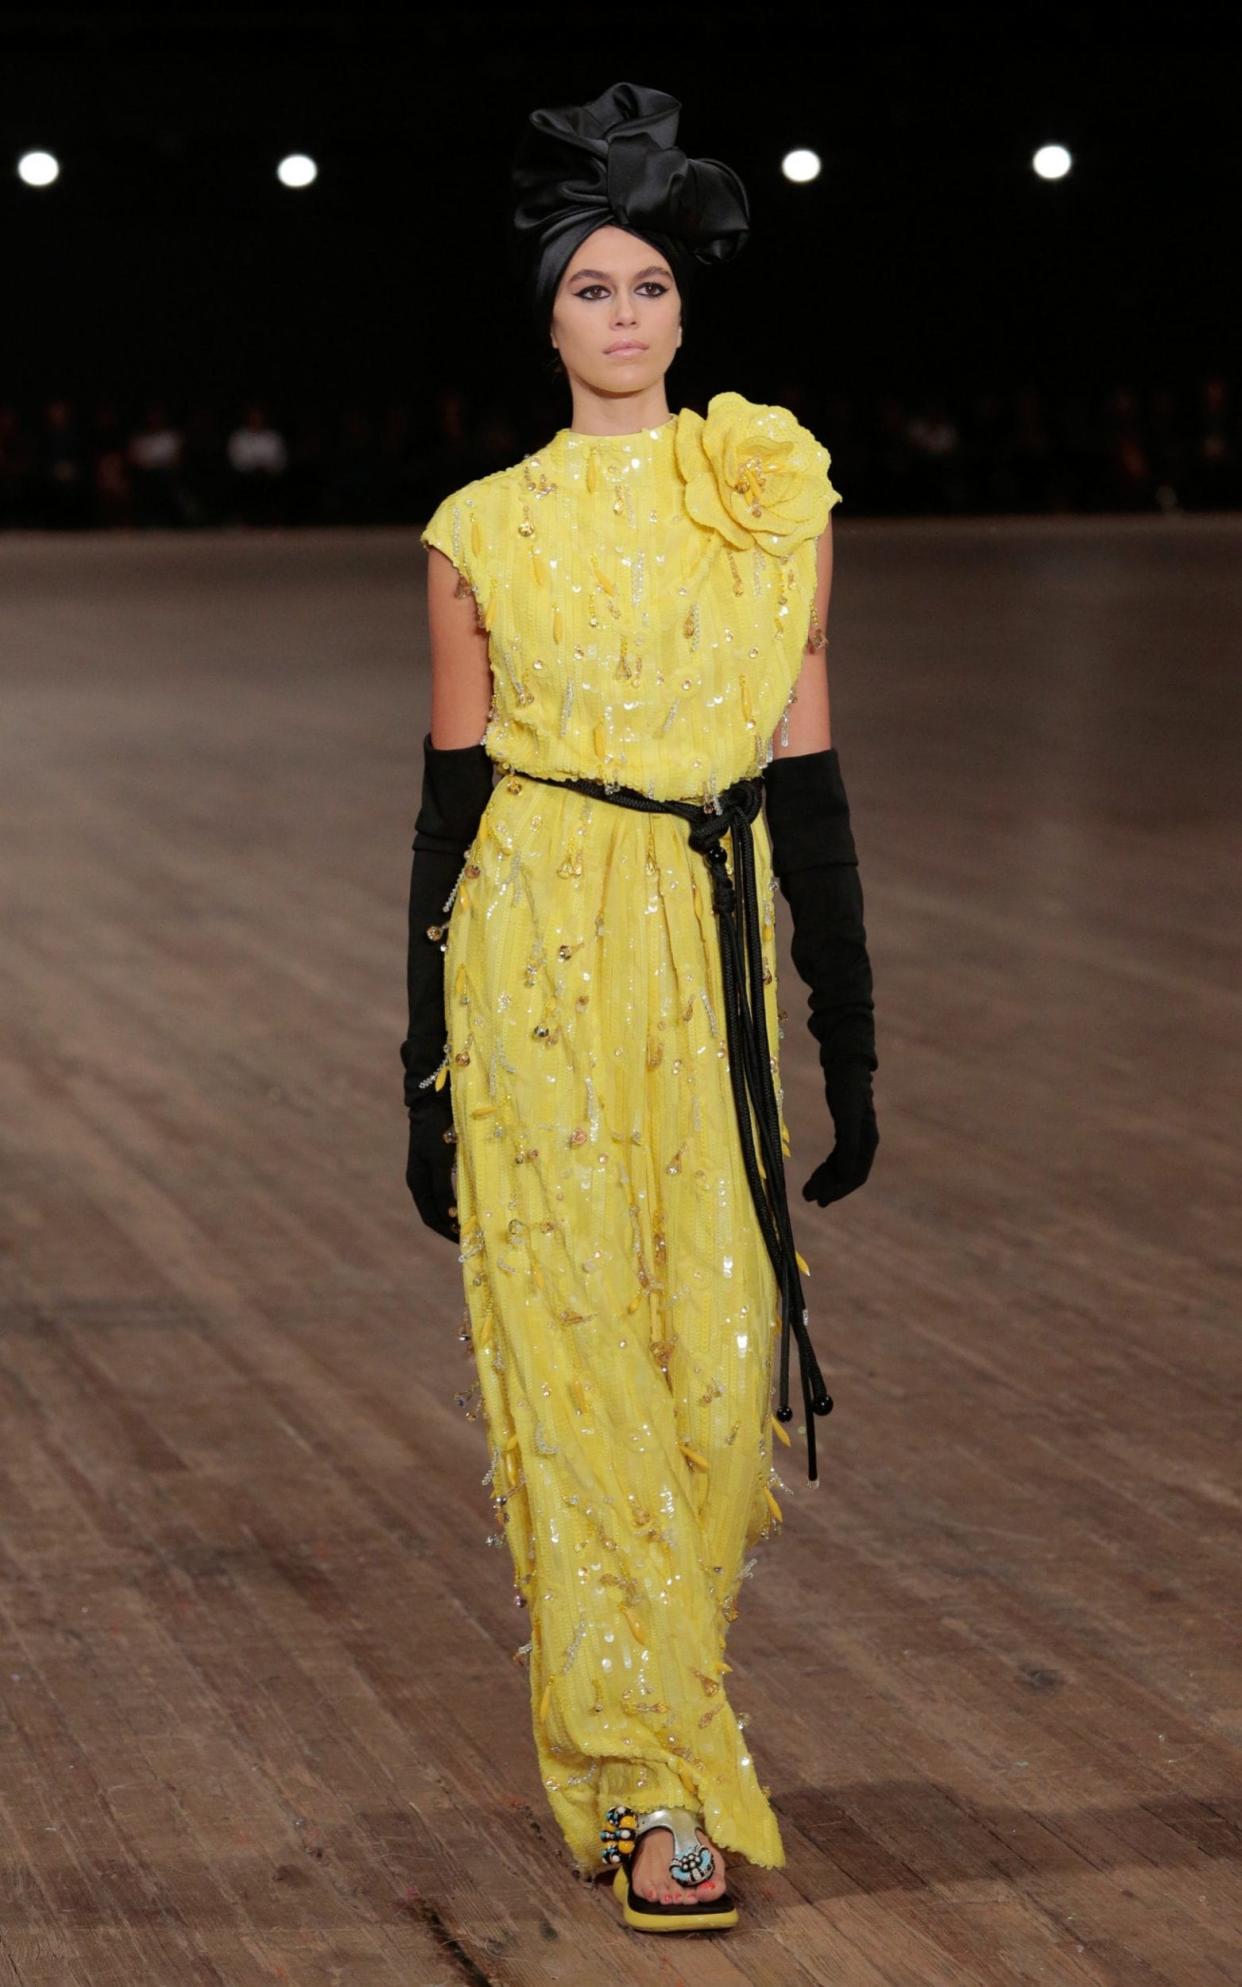 Kaia Gerber on the Marc Jacobs SS18 catwalk - WireImage